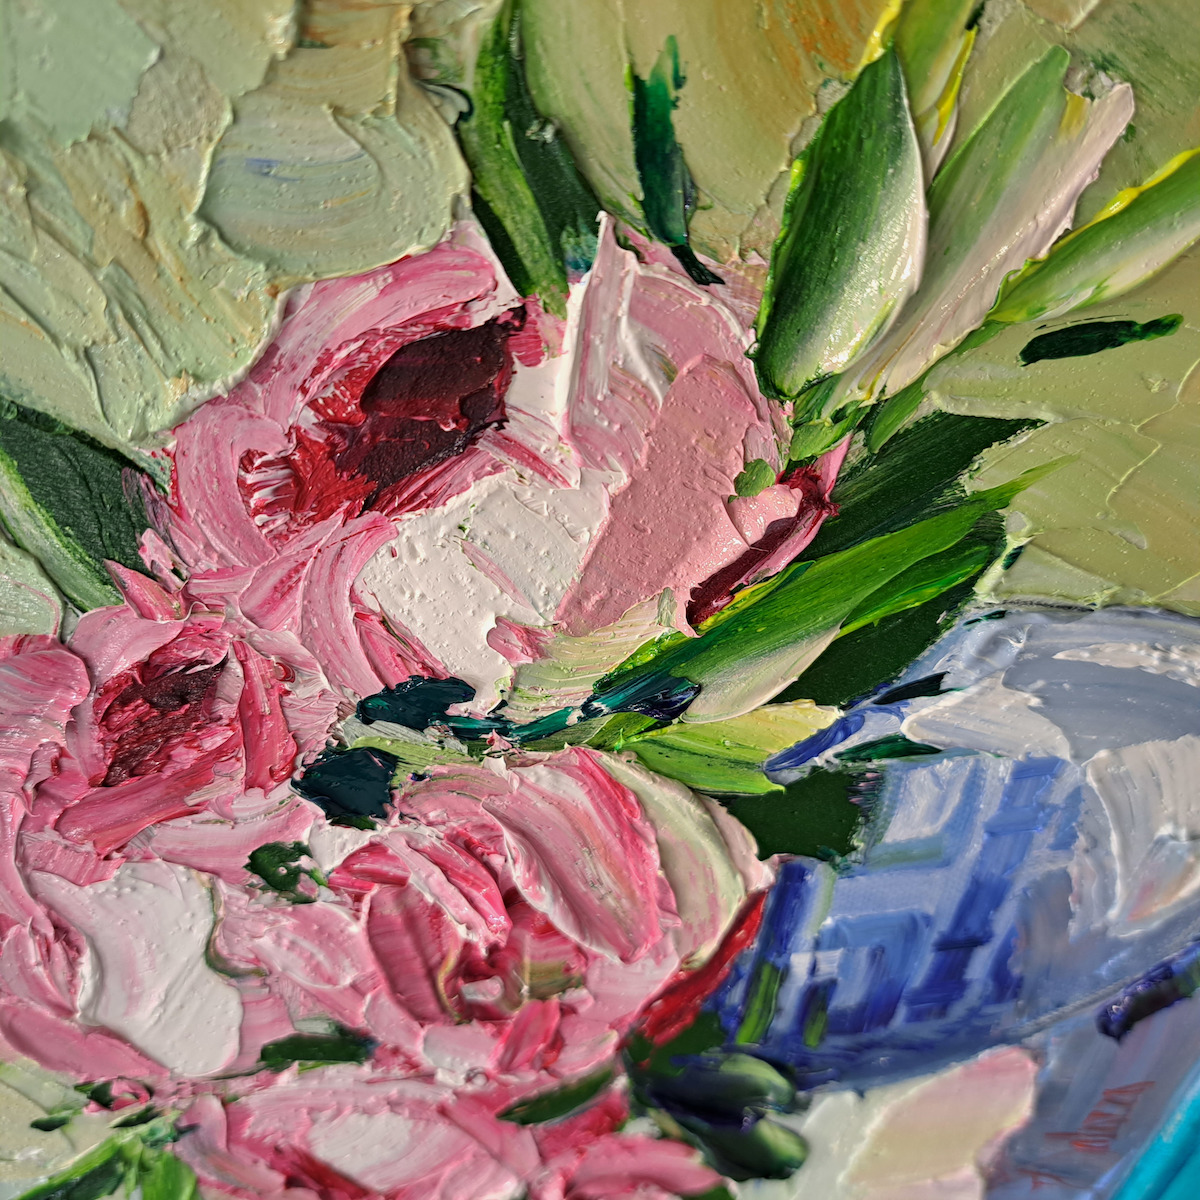 Creation Stage 2 Of Original Still Life Painting "Peonies in Ginger Jar" By Judith Dalozzo